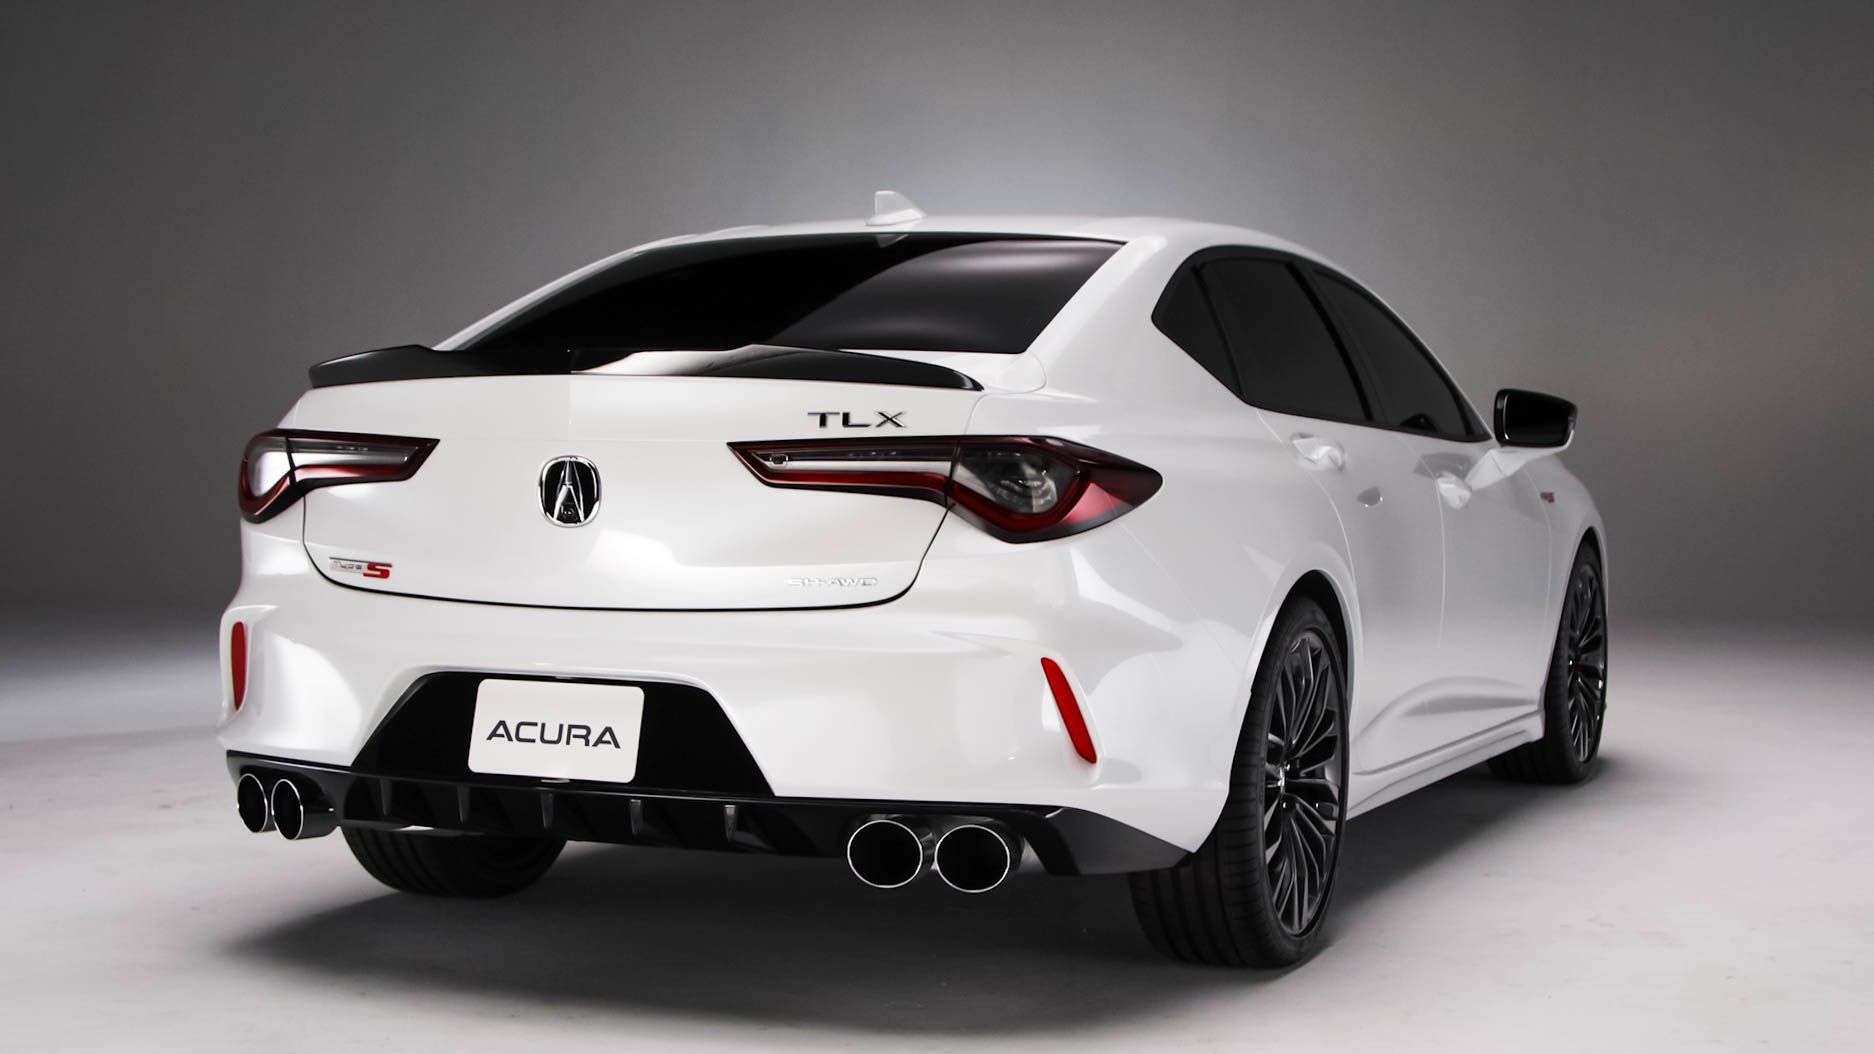 Gallery: The All-New 2021 Acura TLX Is Sporty, Stylish